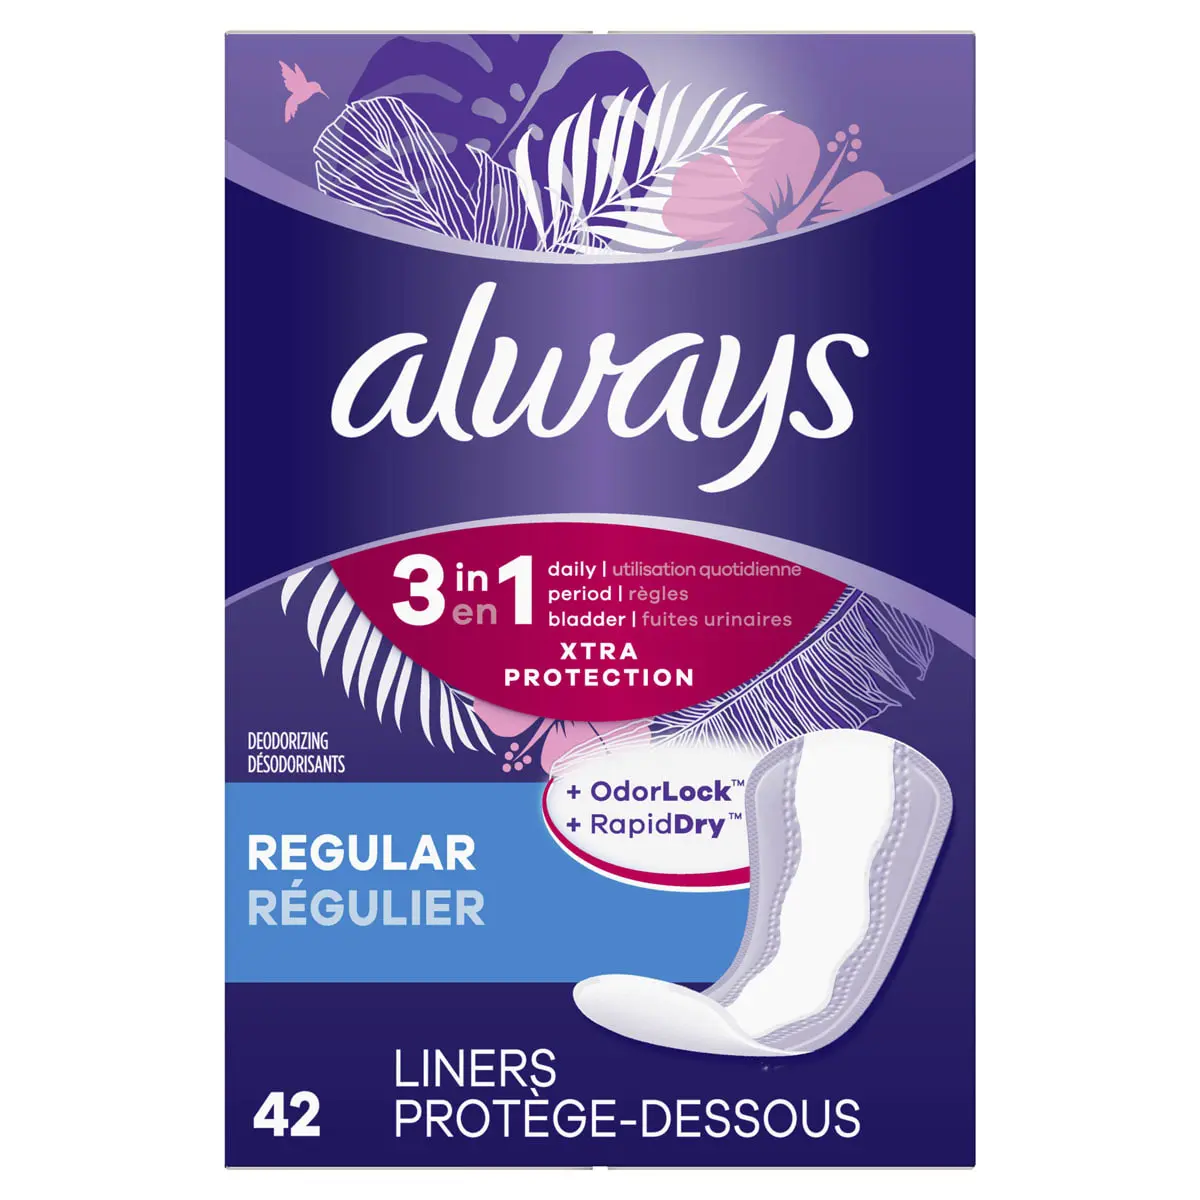 Product-Always Xtra Protection 3in1 Daily Liners Regular